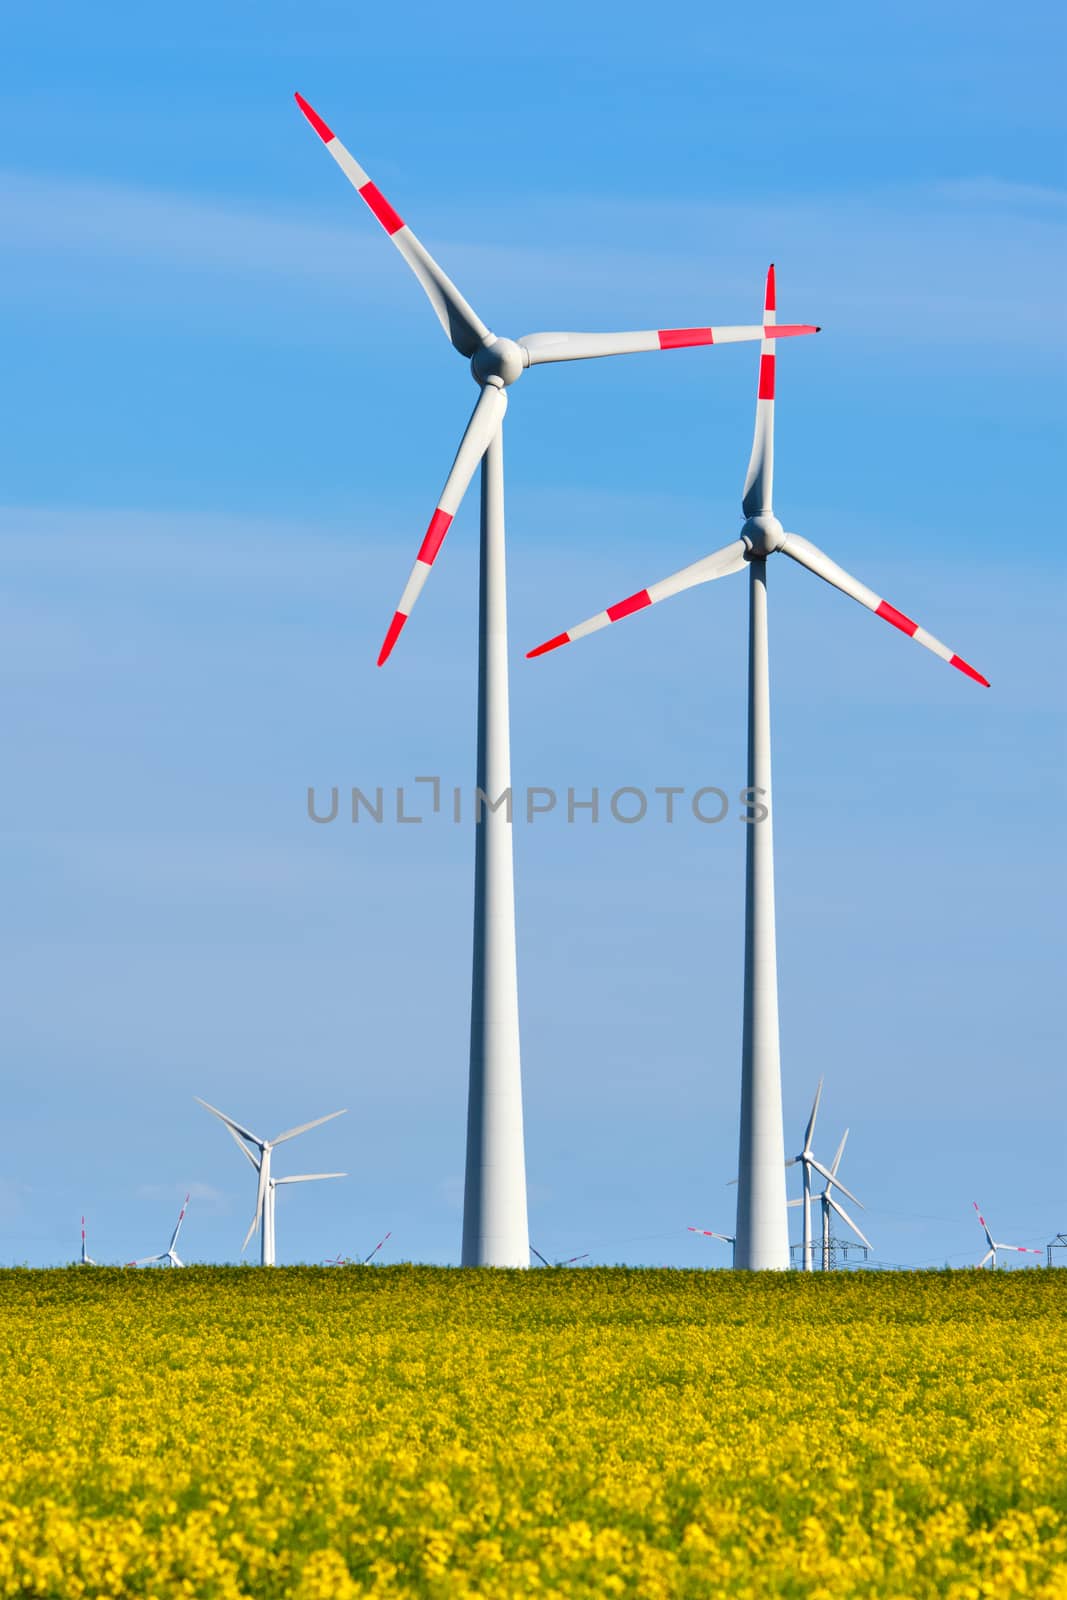 Wind turbines in a thriving rapeseed field seen in Germany